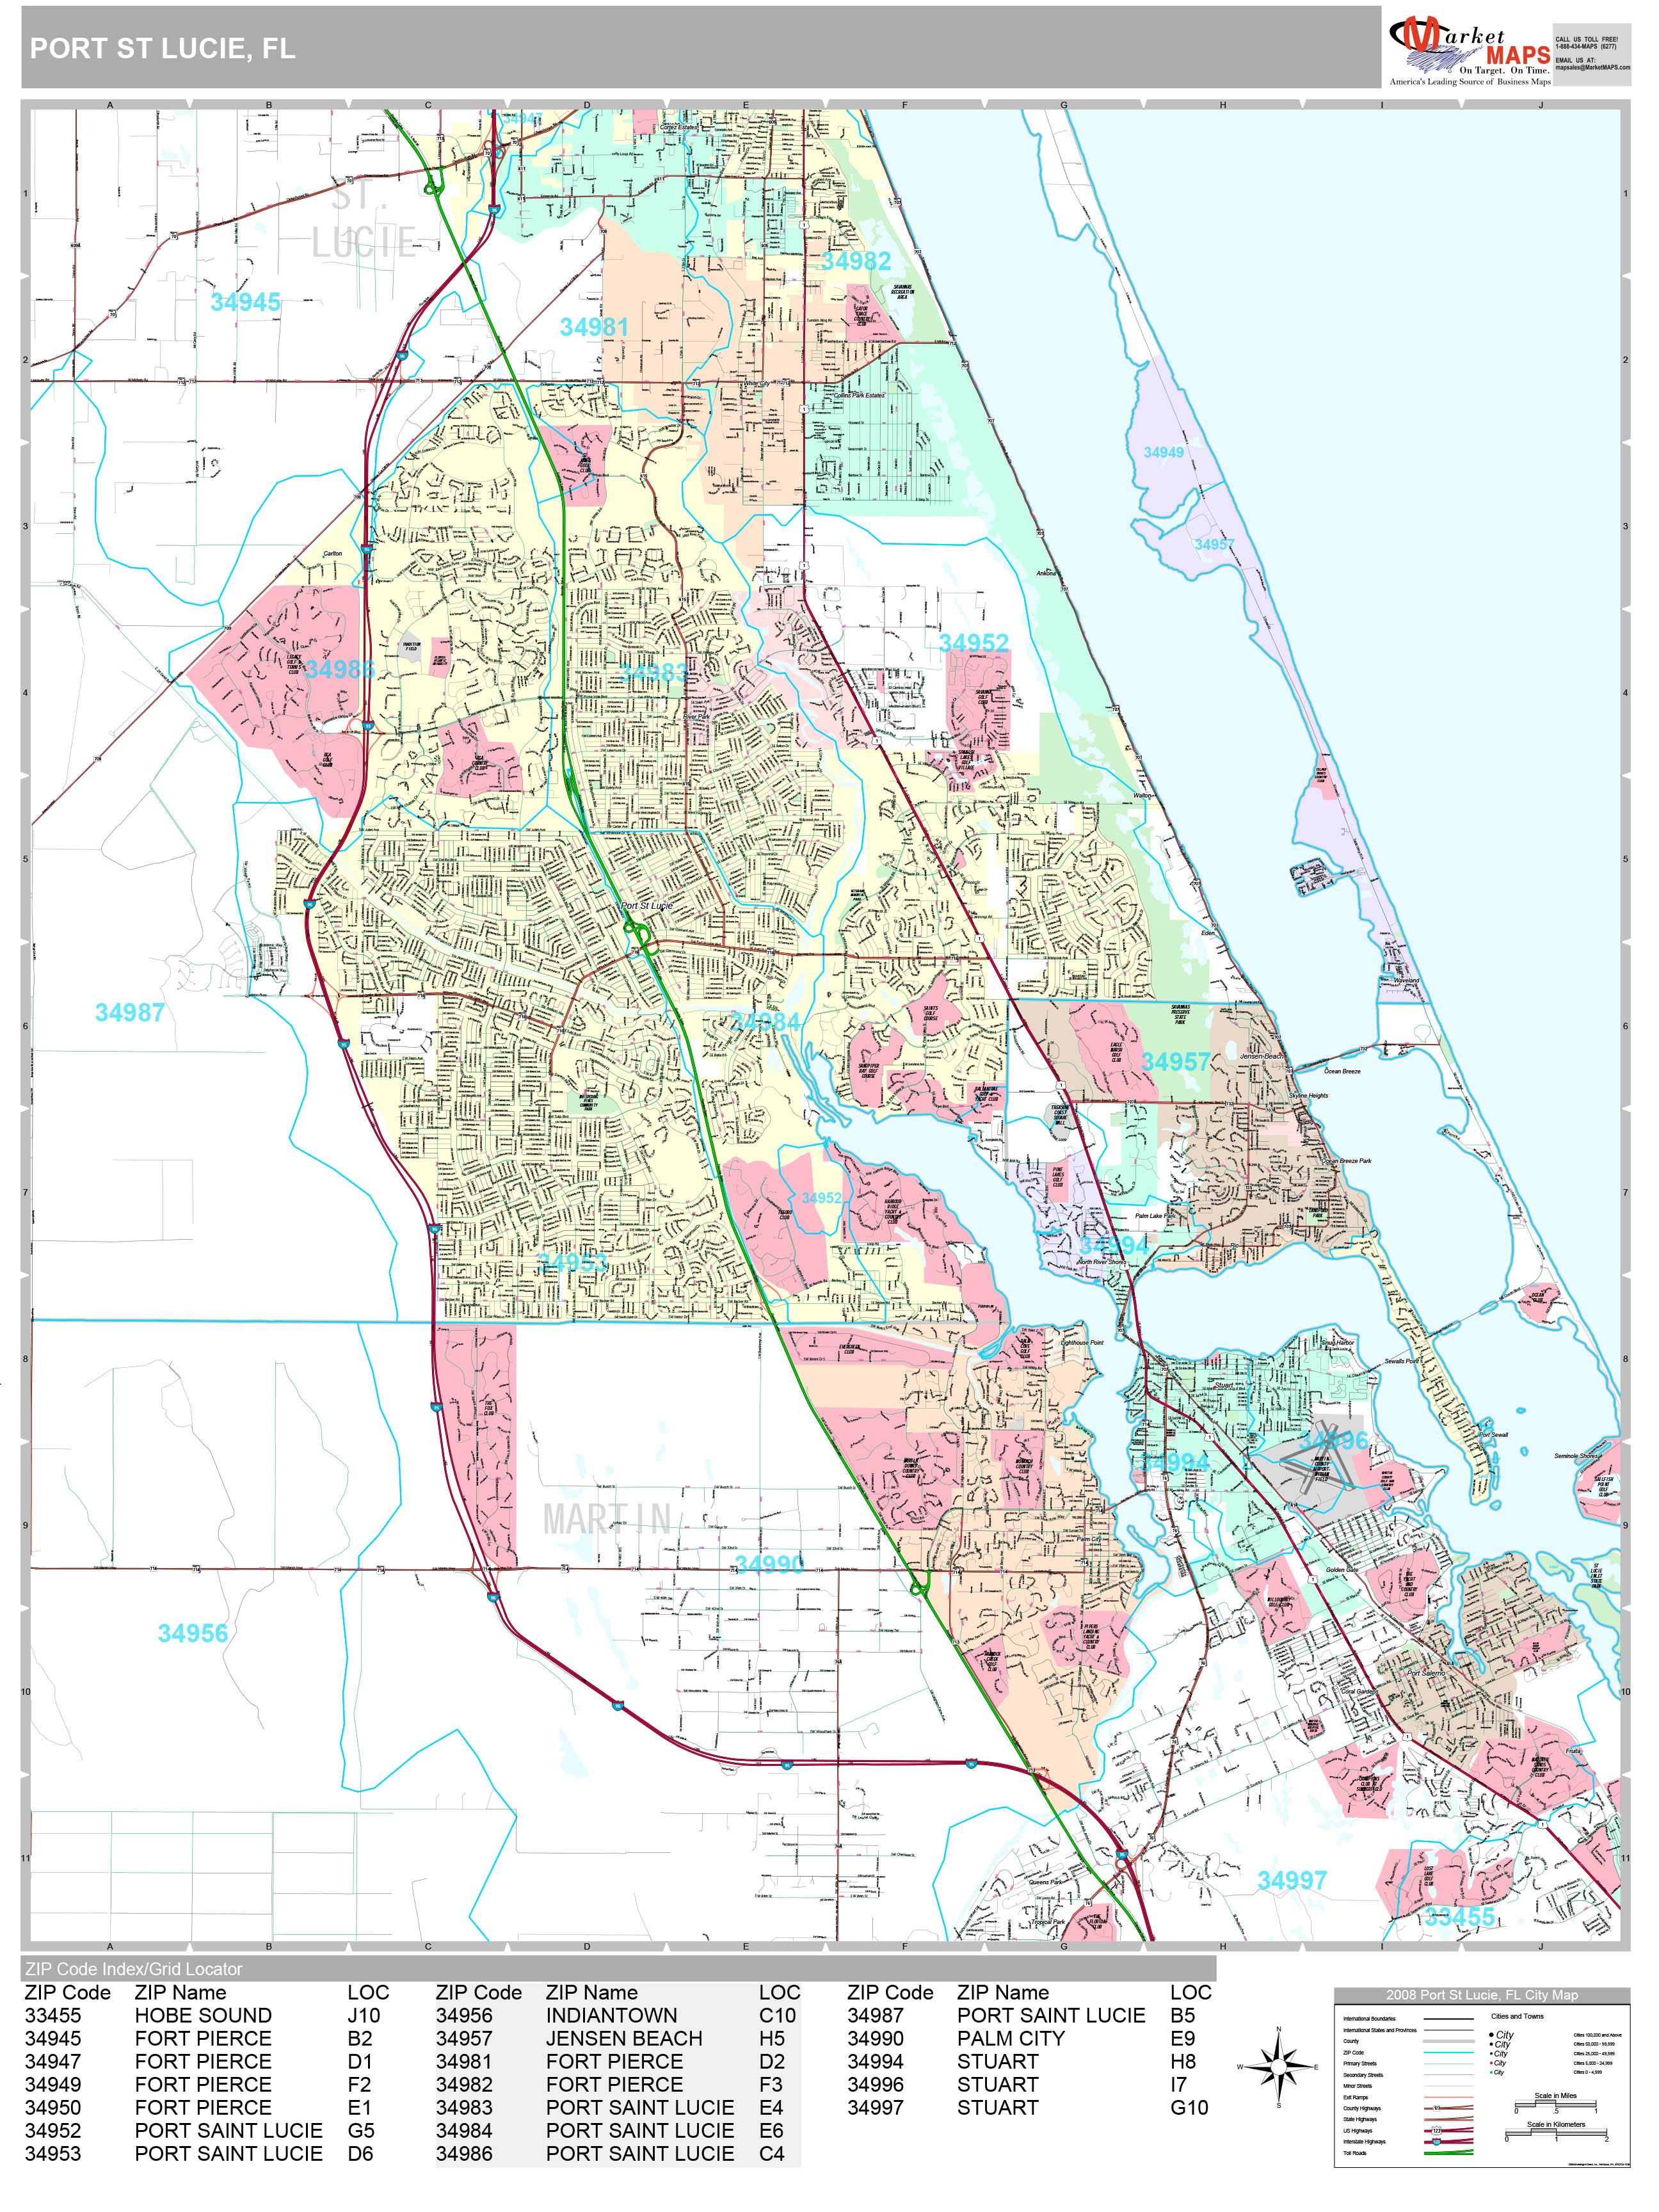 Port St. Lucie Florida Wall Map (Premium Style) by MarketMAPS